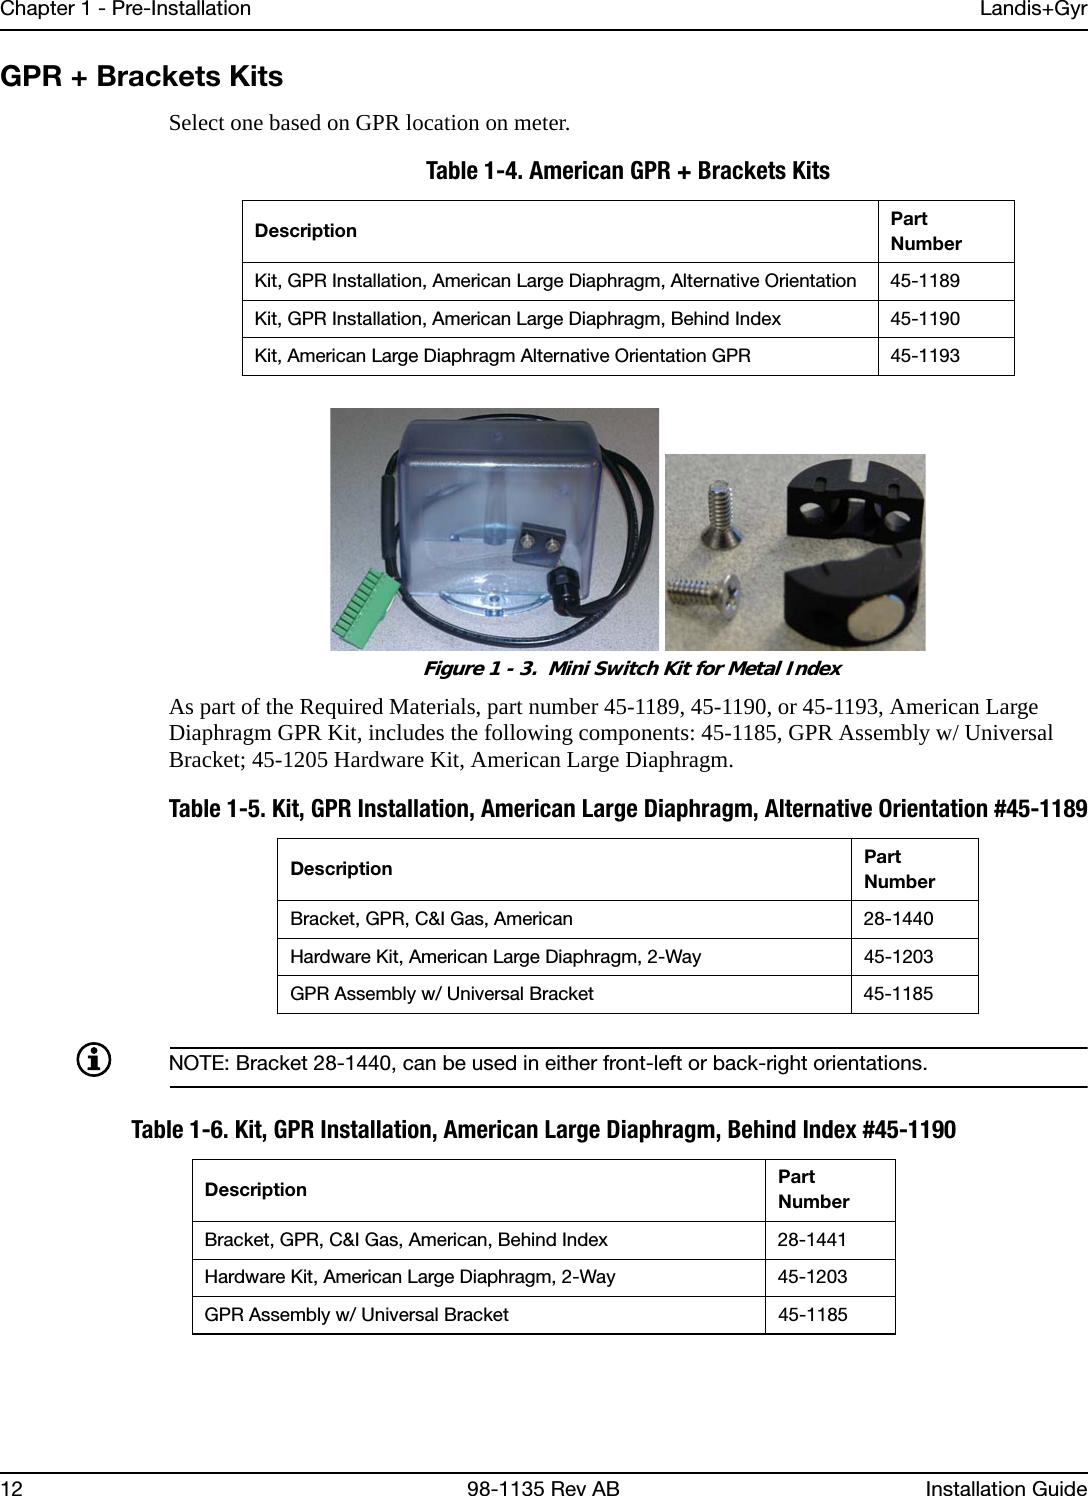 Chapter 1 - Pre-Installation Landis+Gyr12 98-1135 Rev AB Installation GuideGPR + Brackets KitsSelect one based on GPR location on meter. Figure 1 - 3.  Mini Switch Kit for Metal IndexAs part of the Required Materials, part number 45-1189, 45-1190, or 45-1193, American Large Diaphragm GPR Kit, includes the following components: 45-1185, GPR Assembly w/ Universal Bracket; 45-1205 Hardware Kit, American Large Diaphragm.NOTE: Bracket 28-1440, can be used in either front-left or back-right orientations.Table 1-4. American GPR + Brackets KitsDescription Part NumberKit, GPR Installation, American Large Diaphragm, Alternative Orientation 45-1189Kit, GPR Installation, American Large Diaphragm, Behind Index 45-1190Kit, American Large Diaphragm Alternative Orientation GPR 45-1193Table 1-5. Kit, GPR Installation, American Large Diaphragm, Alternative Orientation #45-1189Description Part NumberBracket, GPR, C&amp;I Gas, American 28-1440Hardware Kit, American Large Diaphragm, 2-Way 45-1203GPR Assembly w/ Universal Bracket 45-1185Table 1-6. Kit, GPR Installation, American Large Diaphragm, Behind Index #45-1190Description Part NumberBracket, GPR, C&amp;I Gas, American, Behind Index 28-1441Hardware Kit, American Large Diaphragm, 2-Way 45-1203GPR Assembly w/ Universal Bracket 45-1185